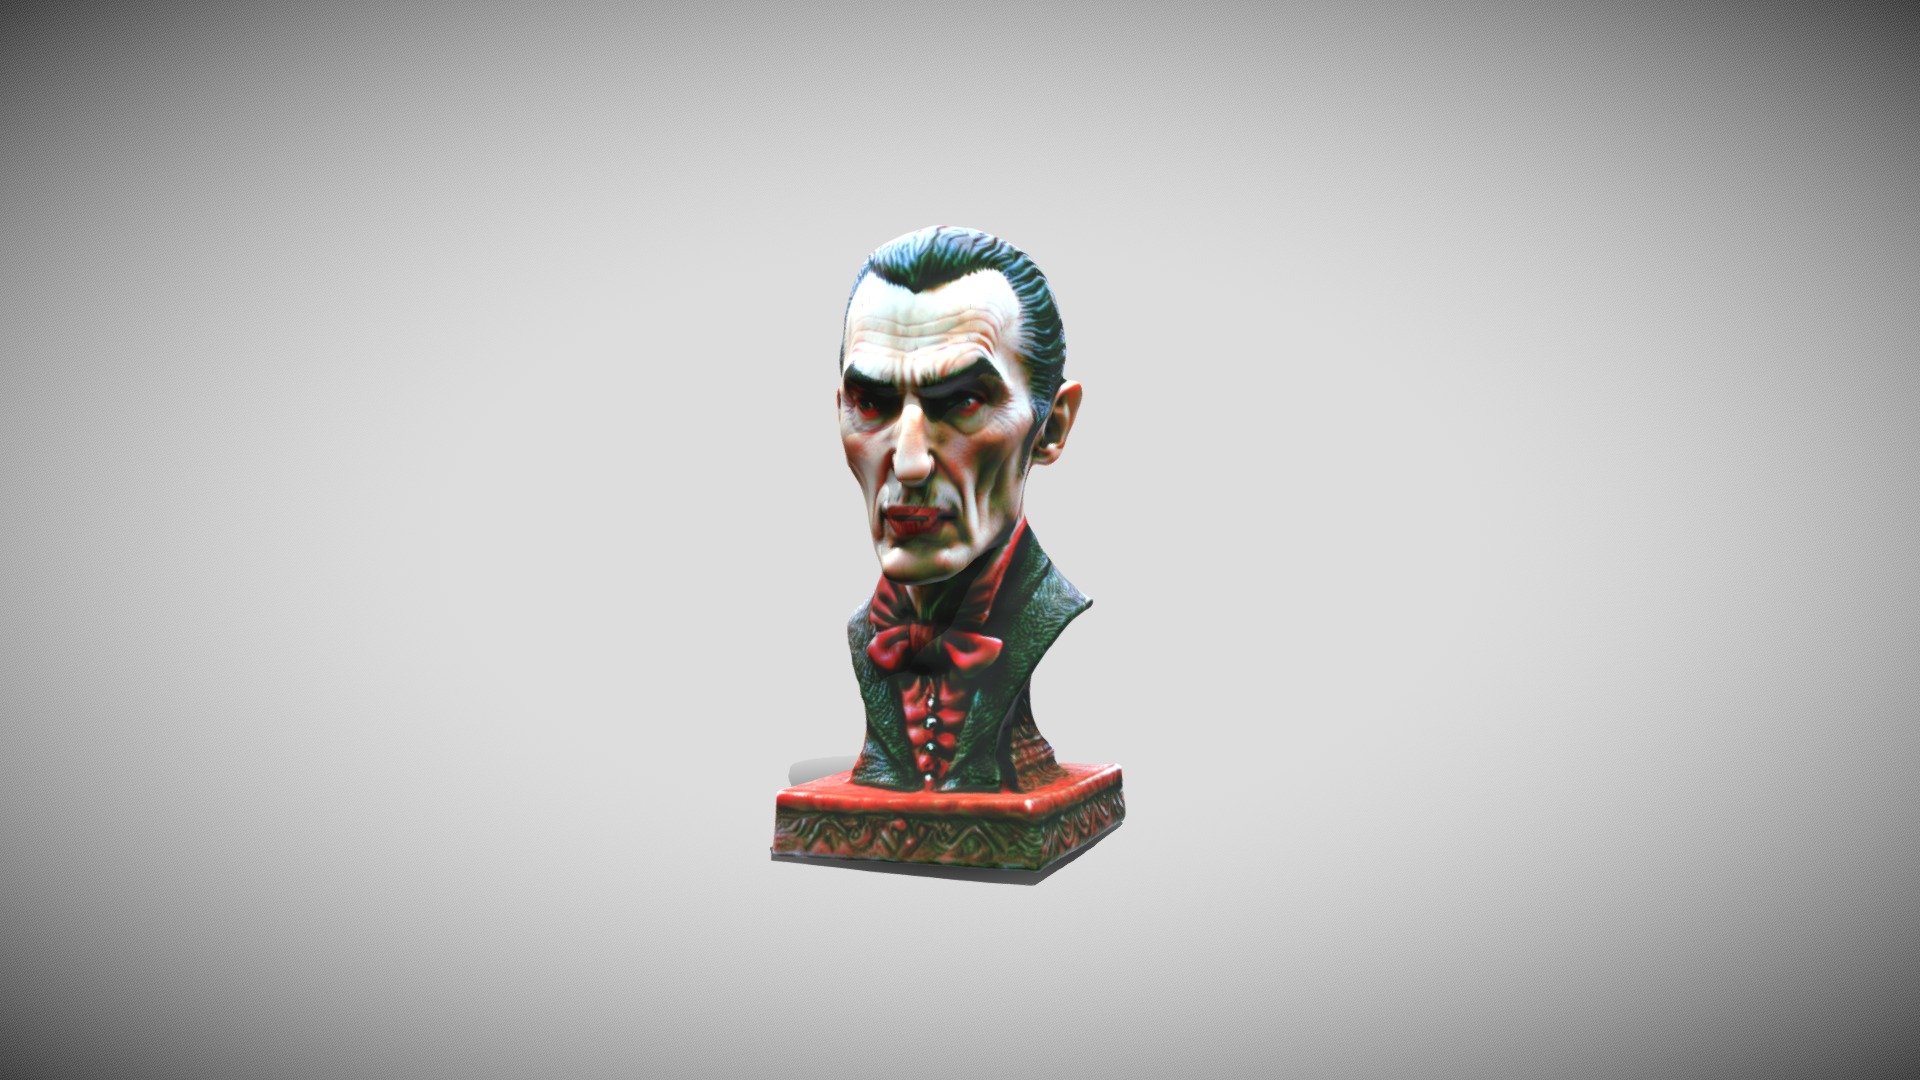 Count Dracula old vampire Bust.

Please take time to view my other work and follow me for more 3d model